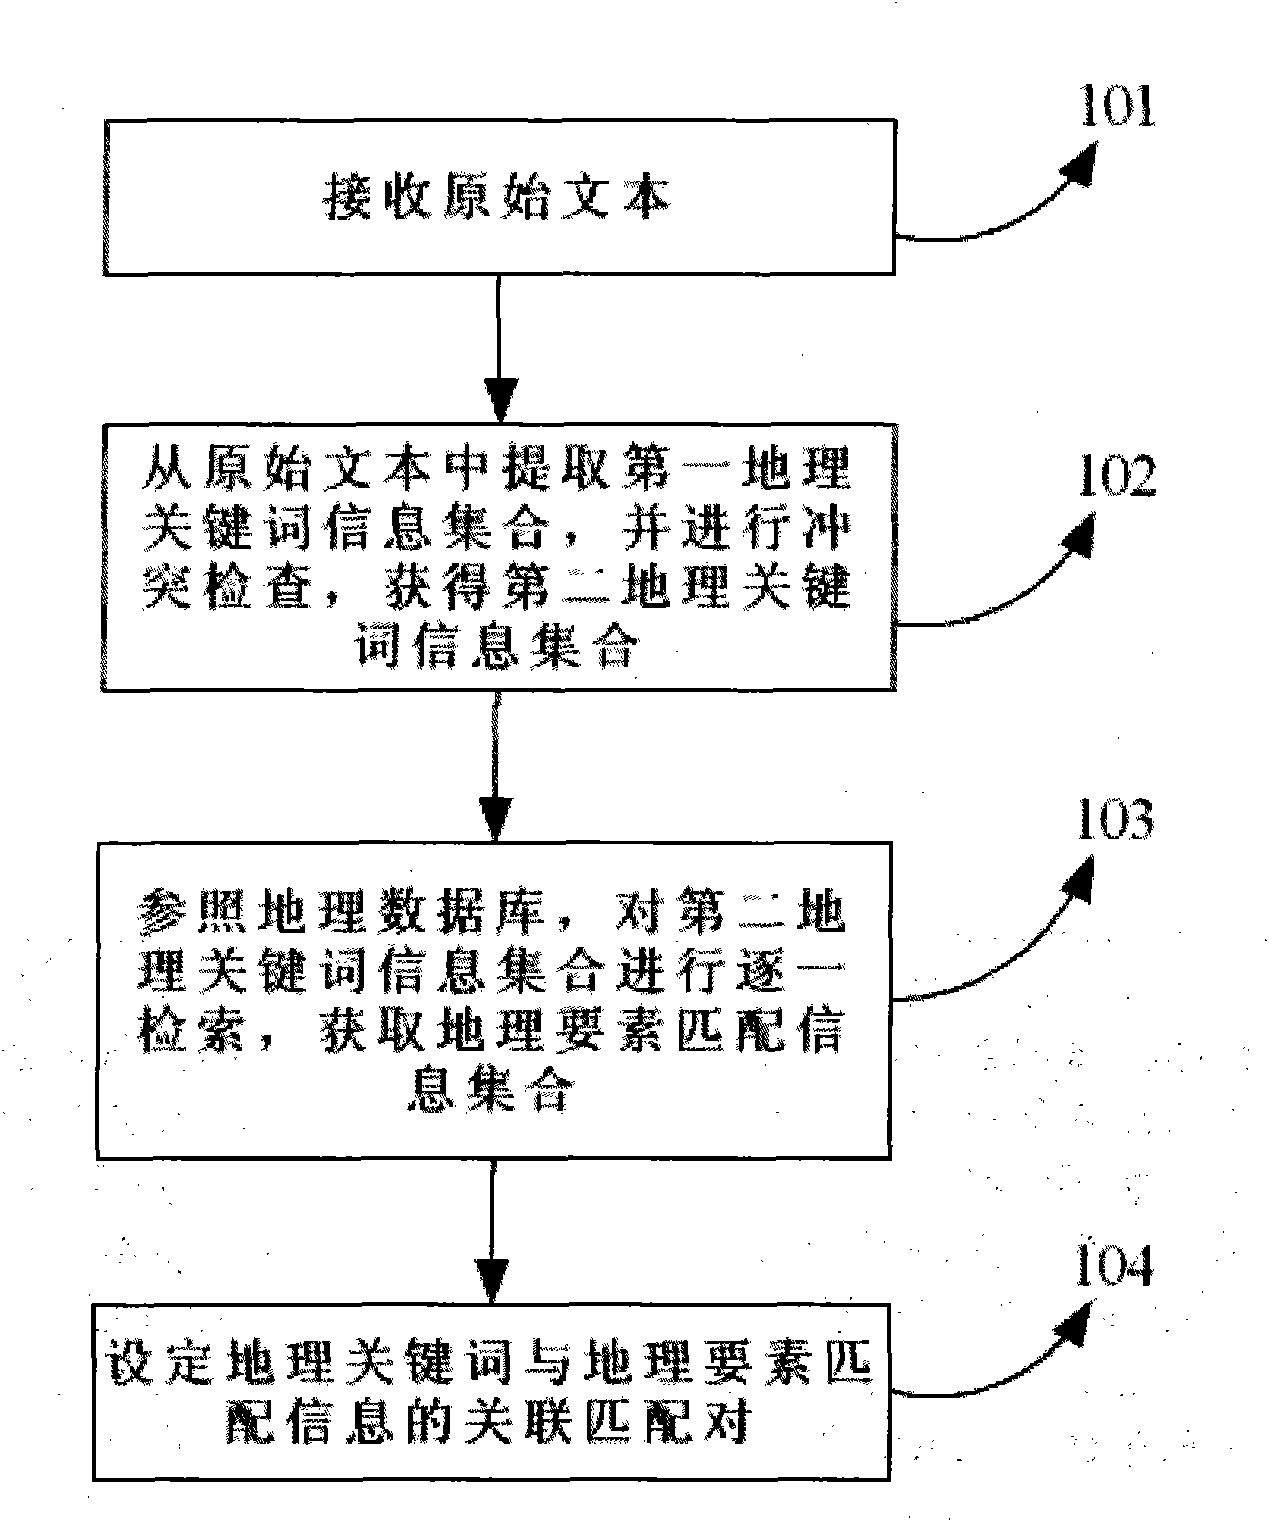 Correlation method of text information and geological information and system